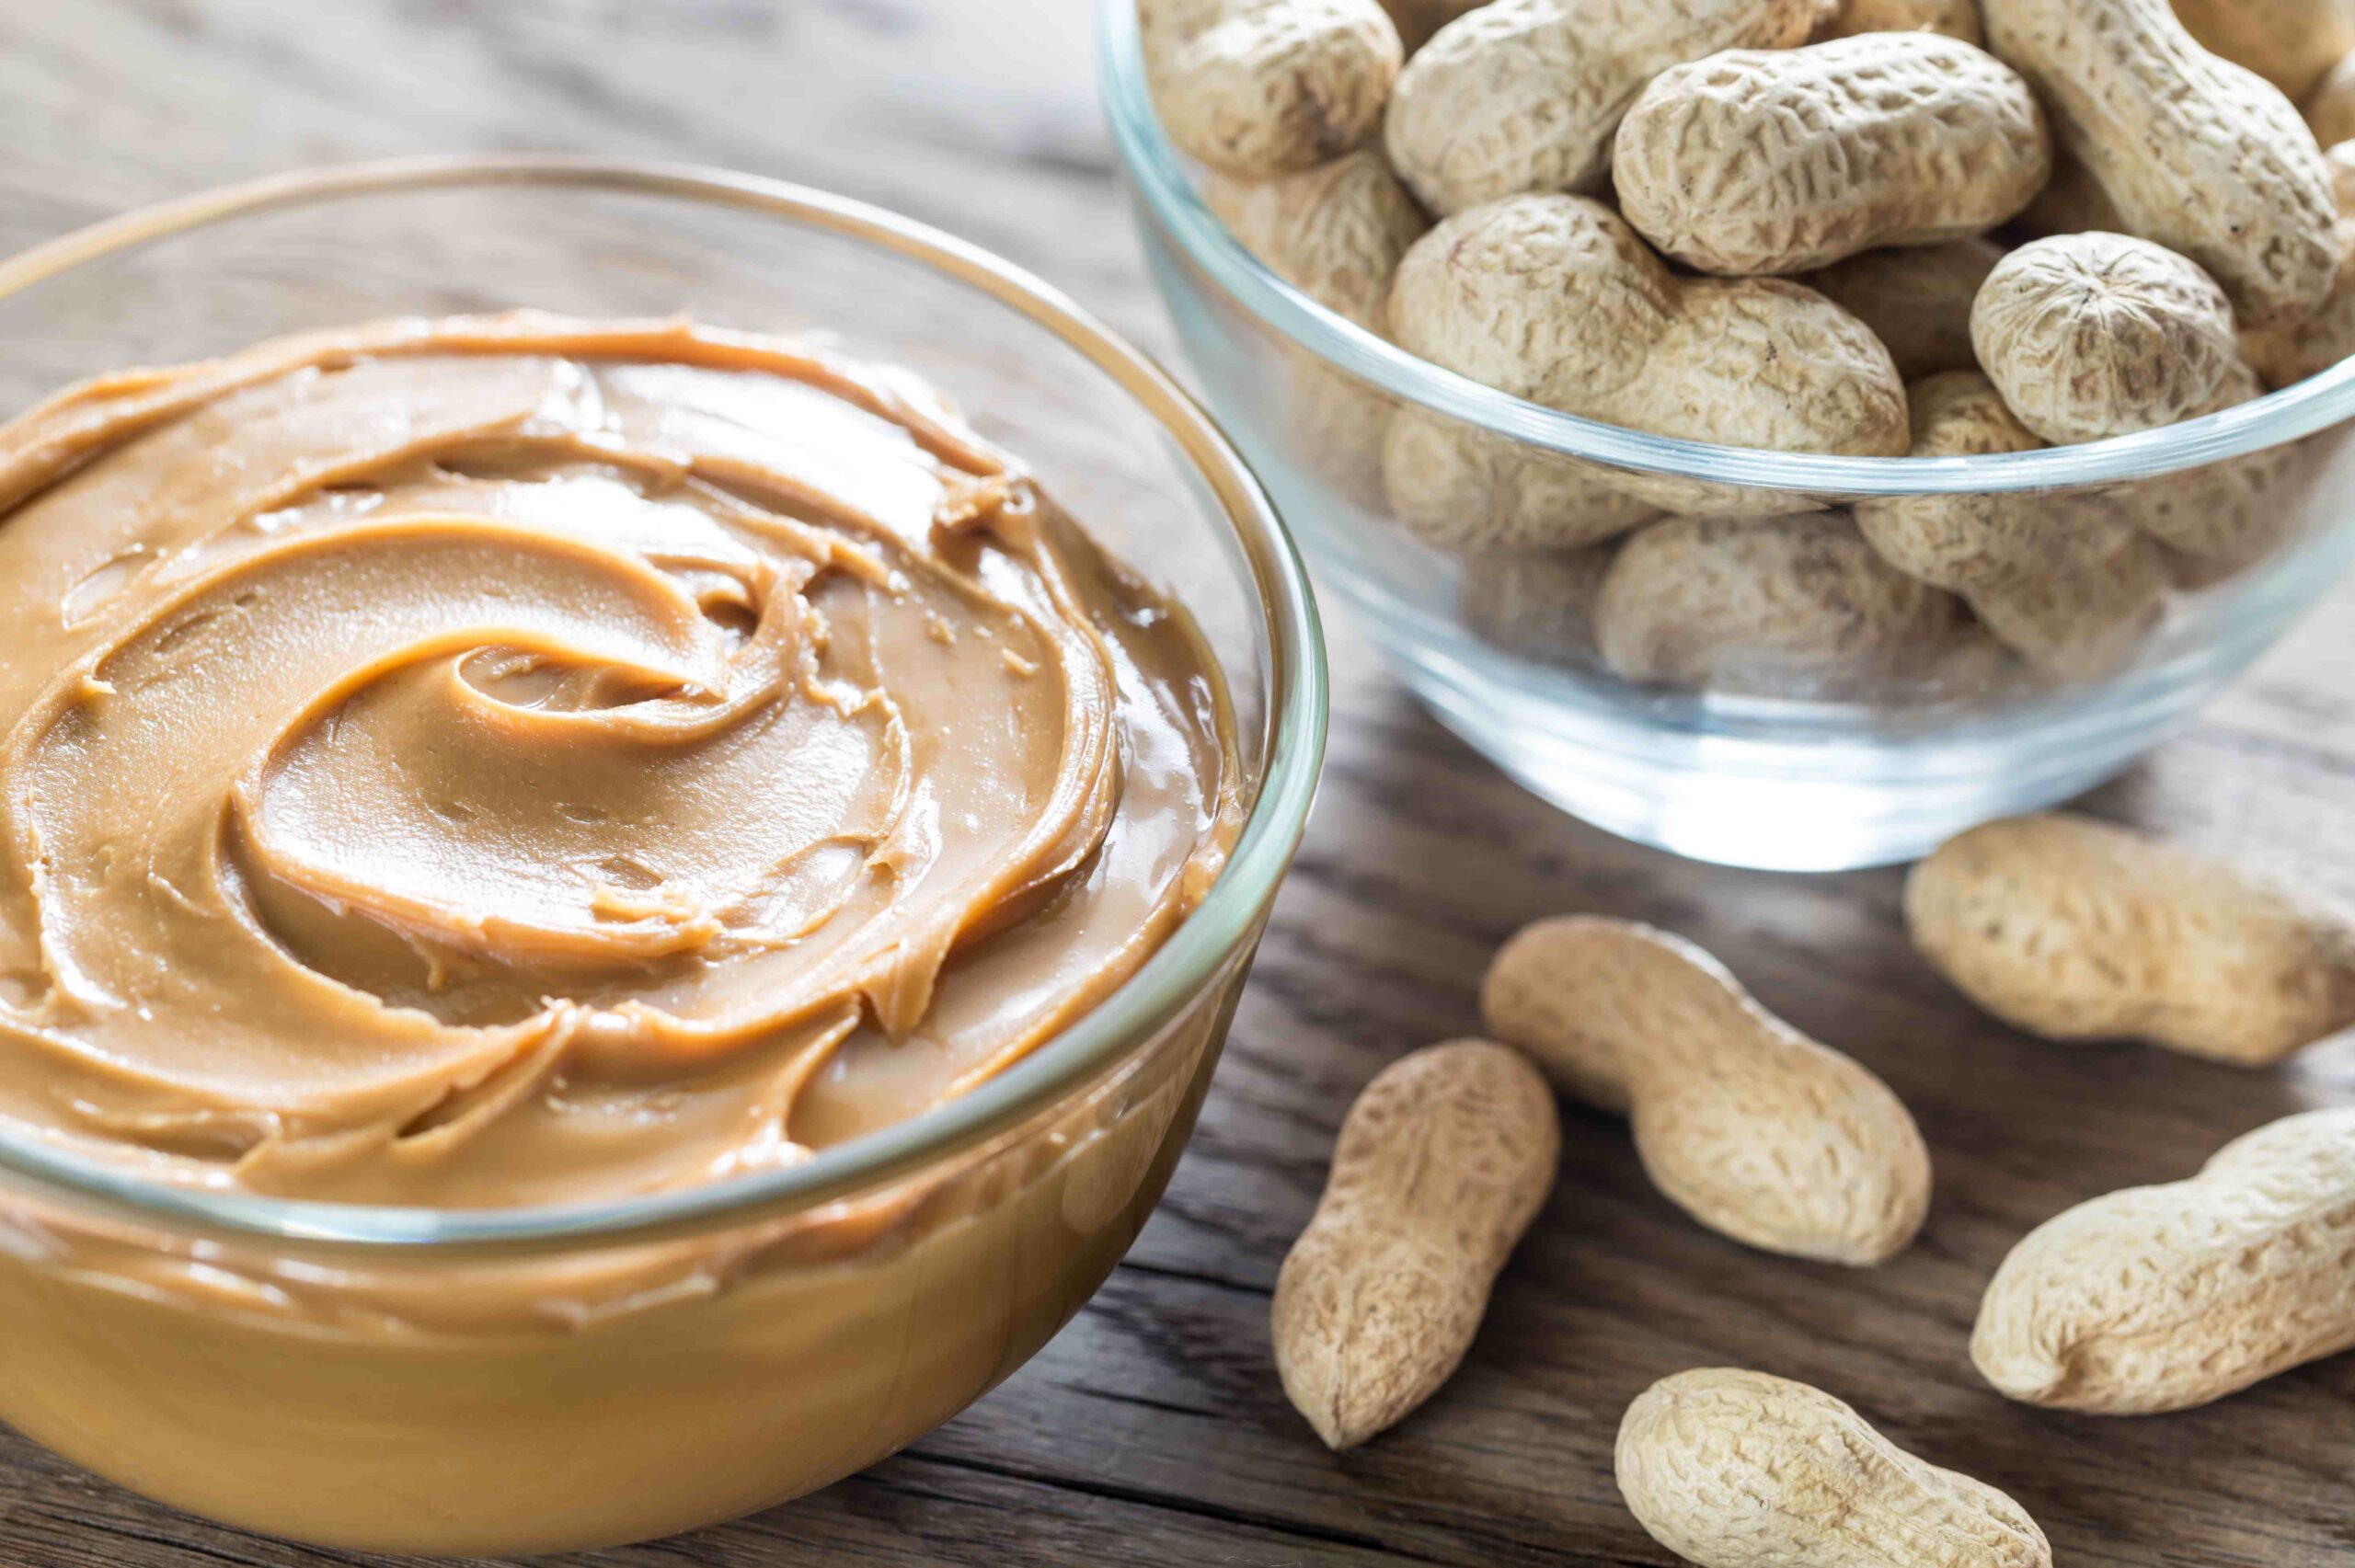 AYURVEDIC DOCTOR SAYS PEANUT BUTTER IS GOOD FOR DIABETICS